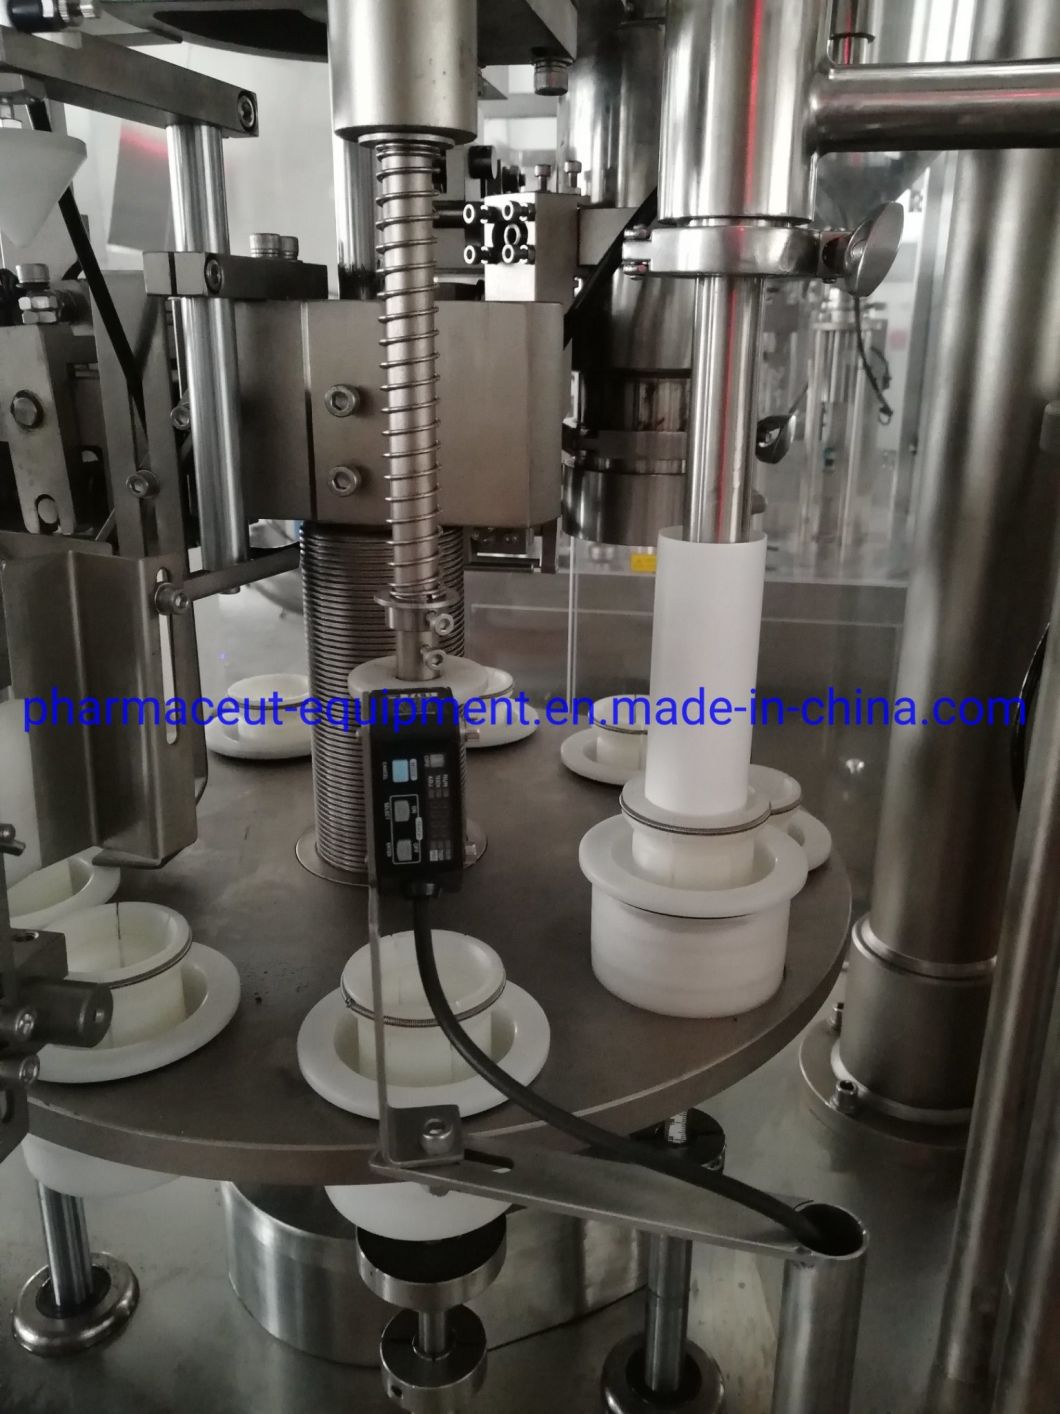 High Quality Laminated Plastic Tube Filling Sealing Machine Manufacture (BNF60)